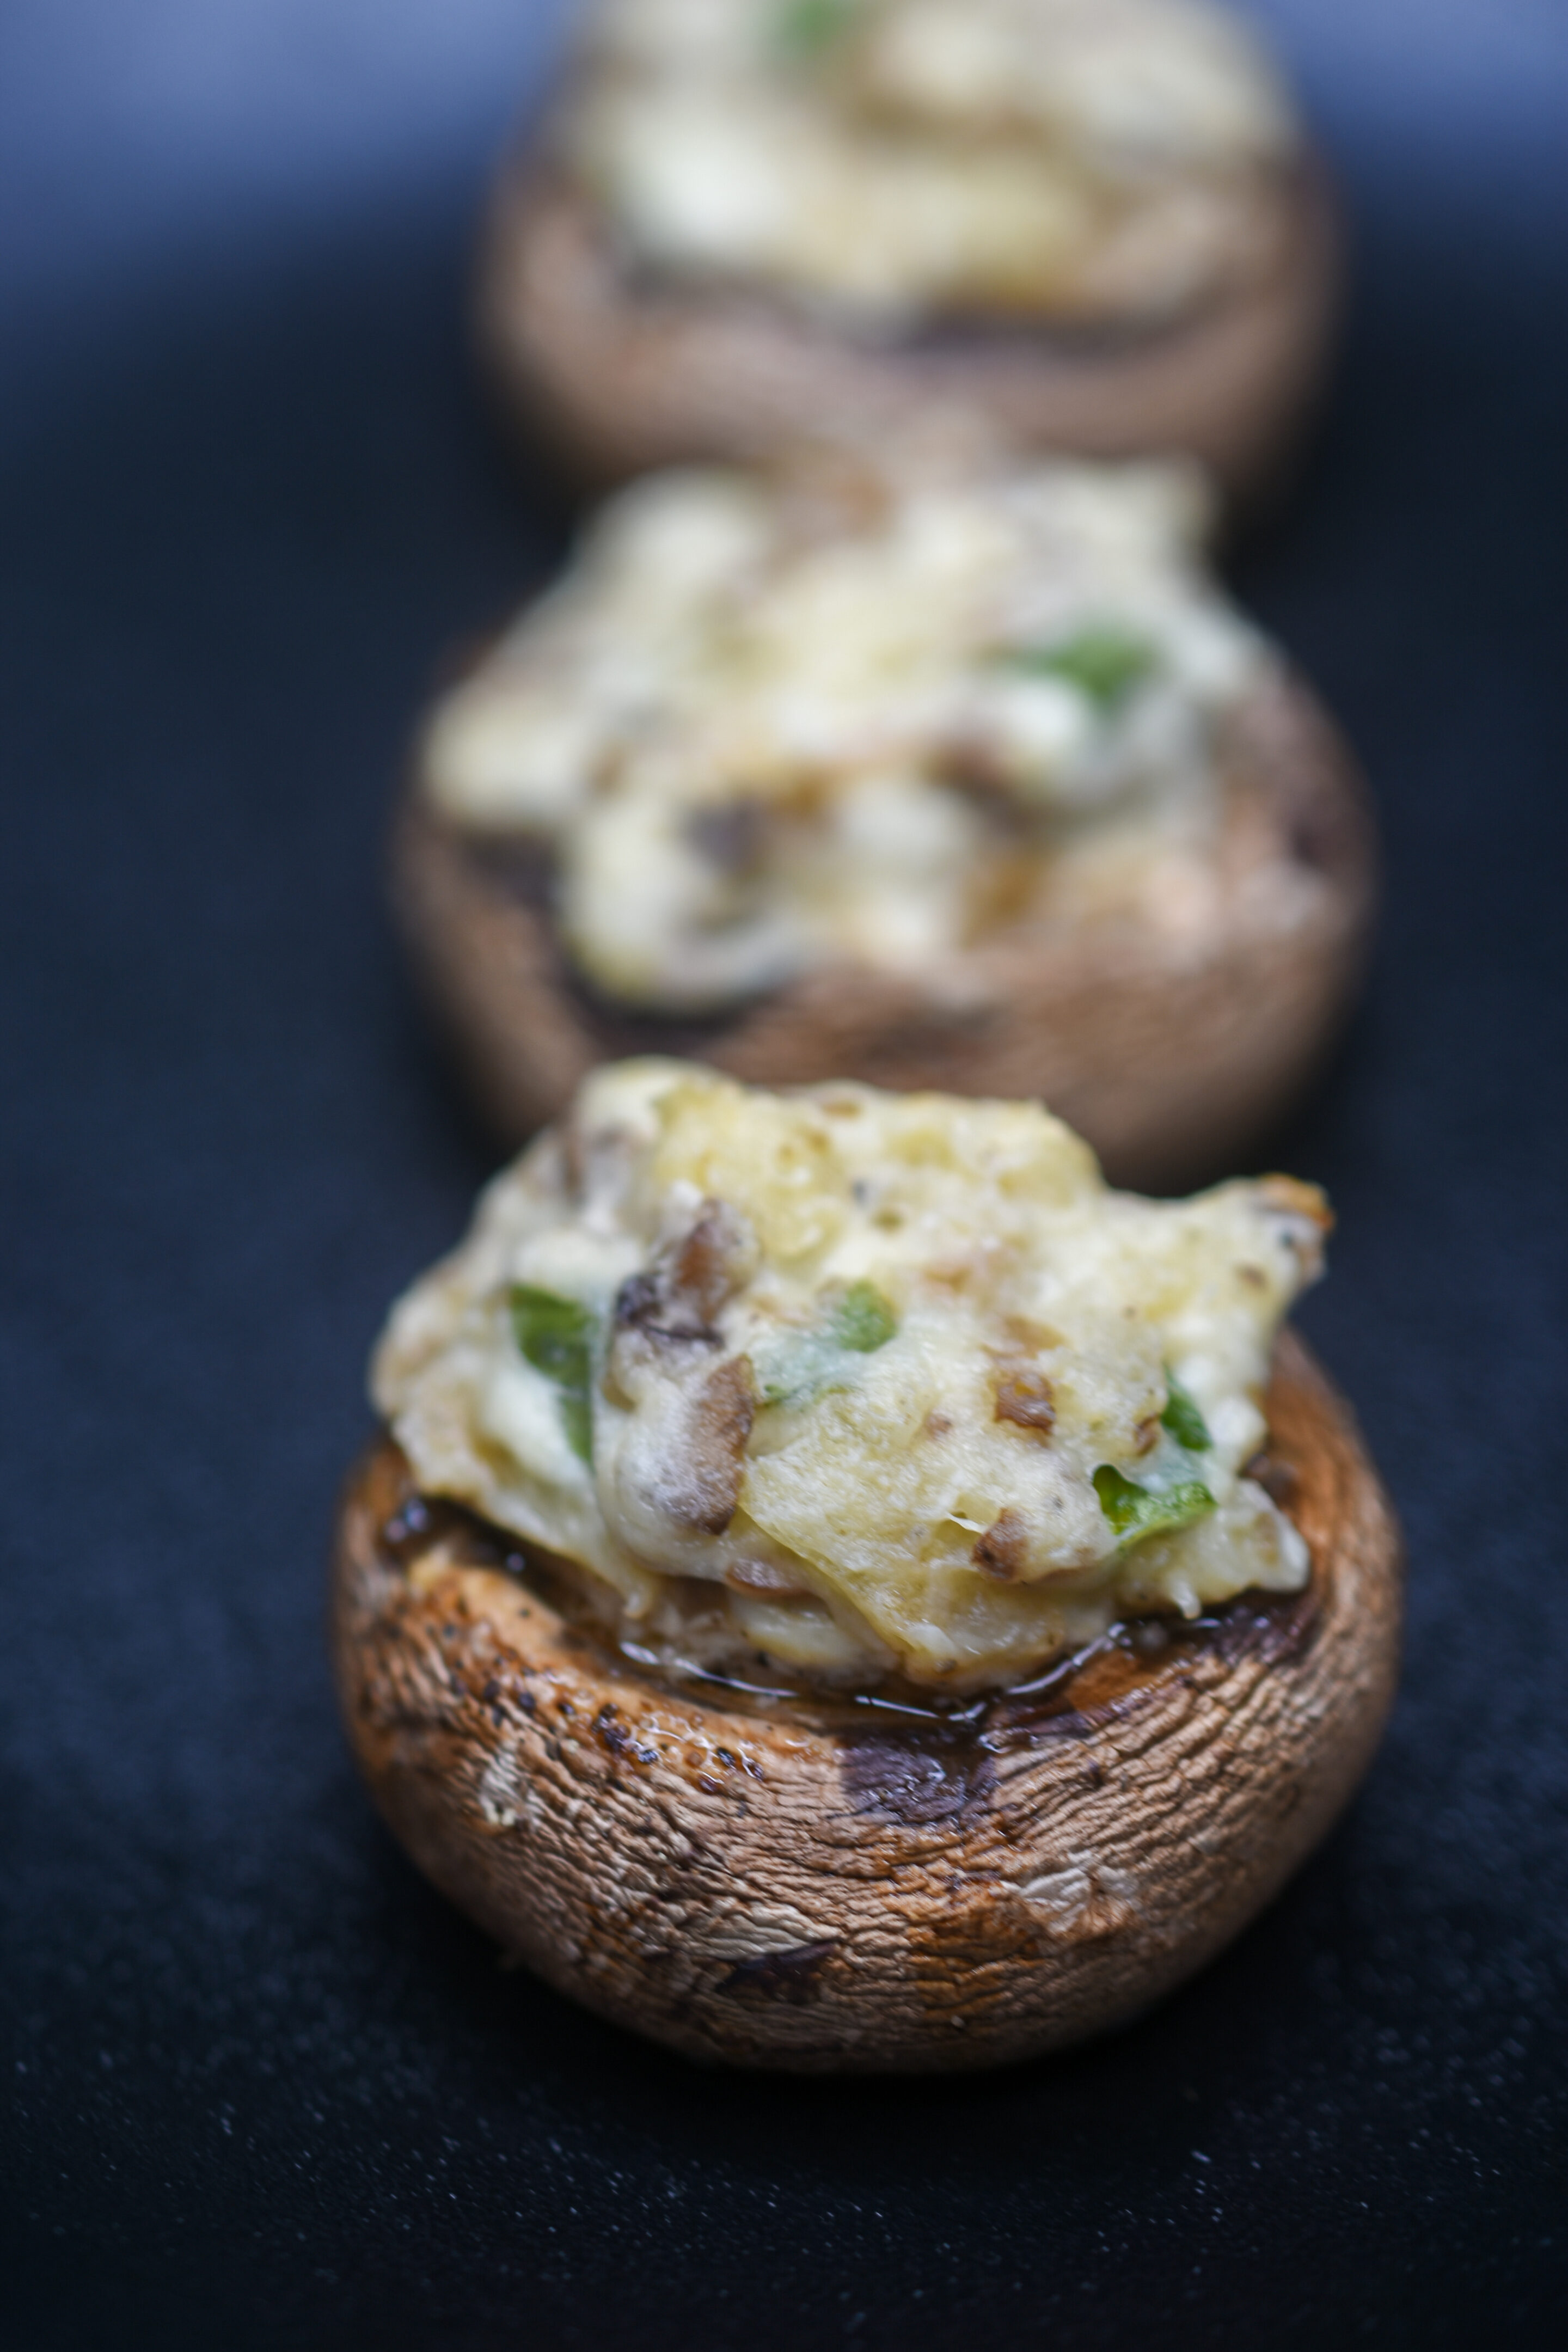 Easy Stuffed Mushrooms Recipe made either vegetarian or with sausage.